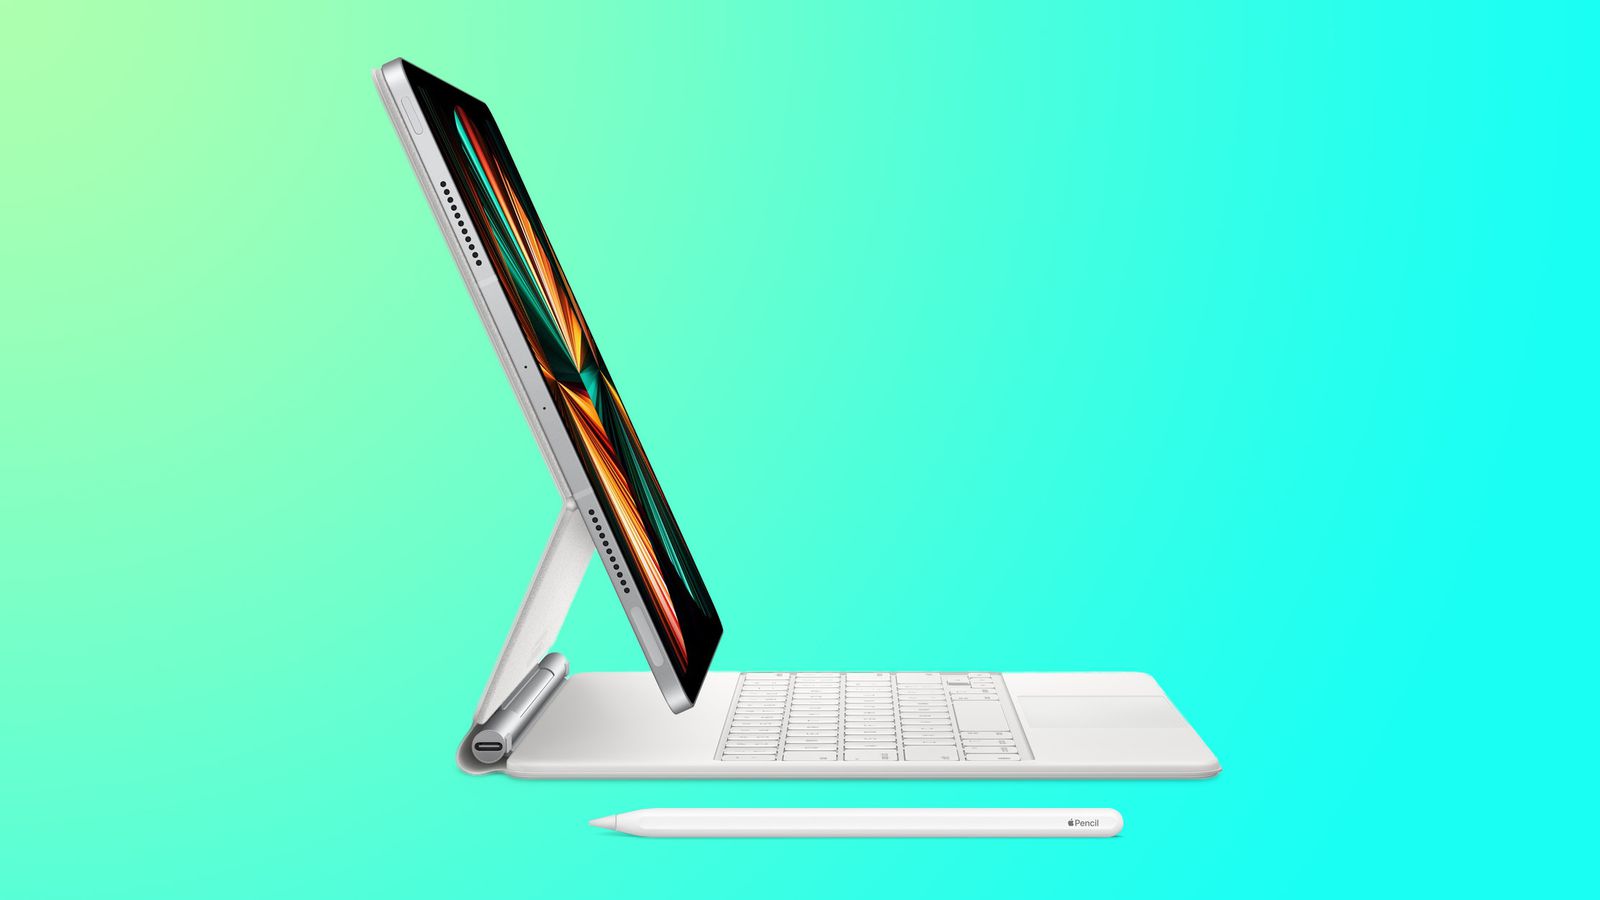 Deals: Get $128.70 Off When Bundling Apple Pencil 2 and 11-Inch ...